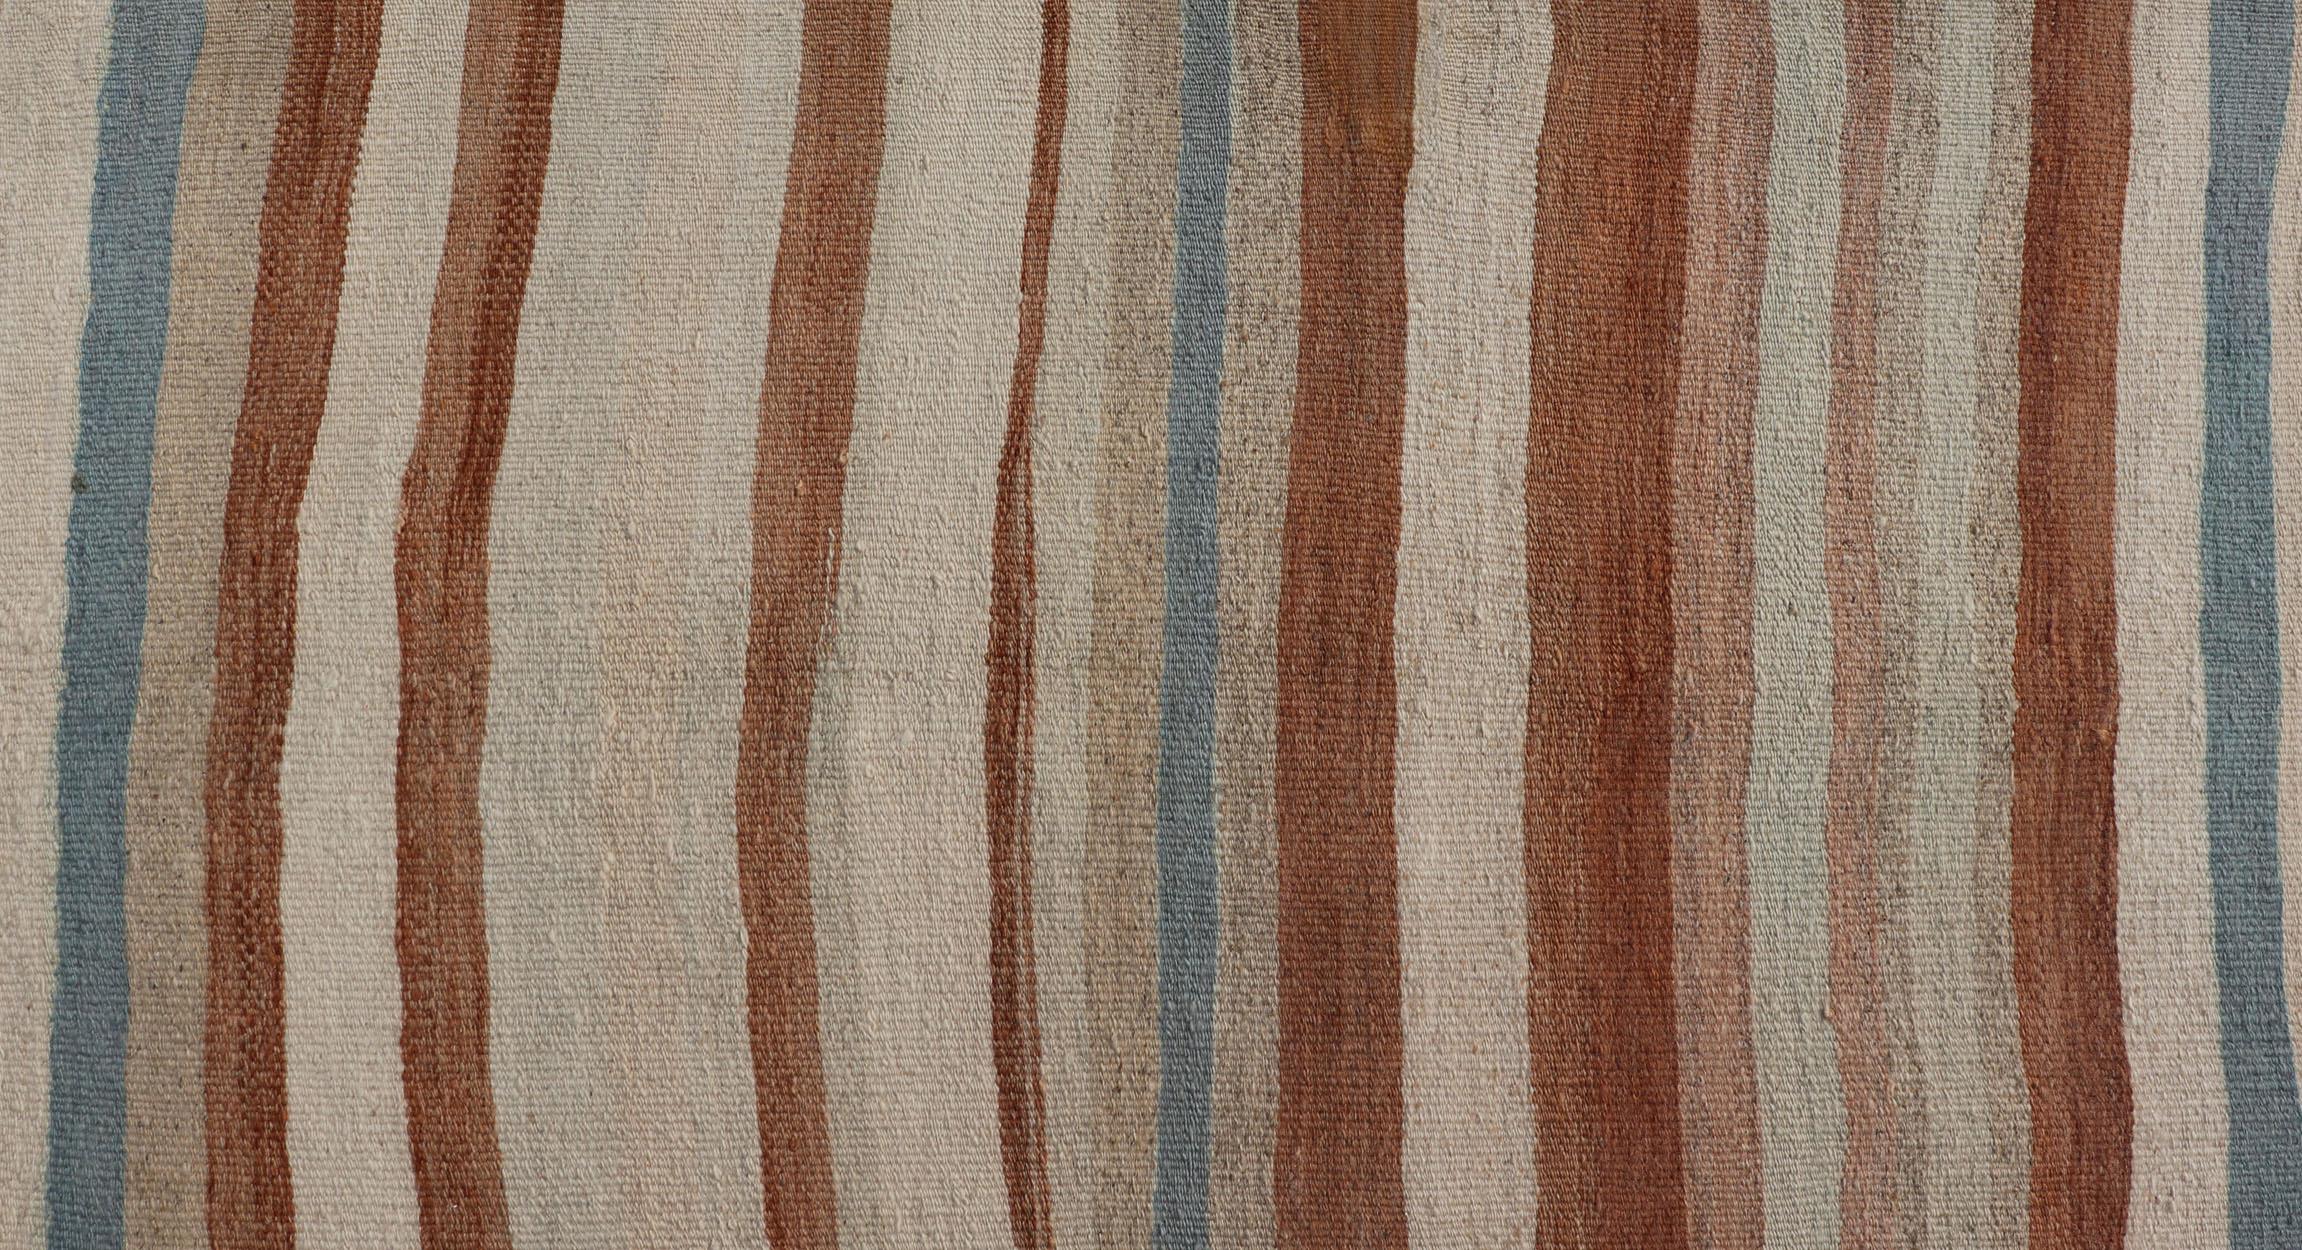 Striped Vintage Turkish Kilim Runner in Shades of Brown, Cream, and Blue For Sale 3